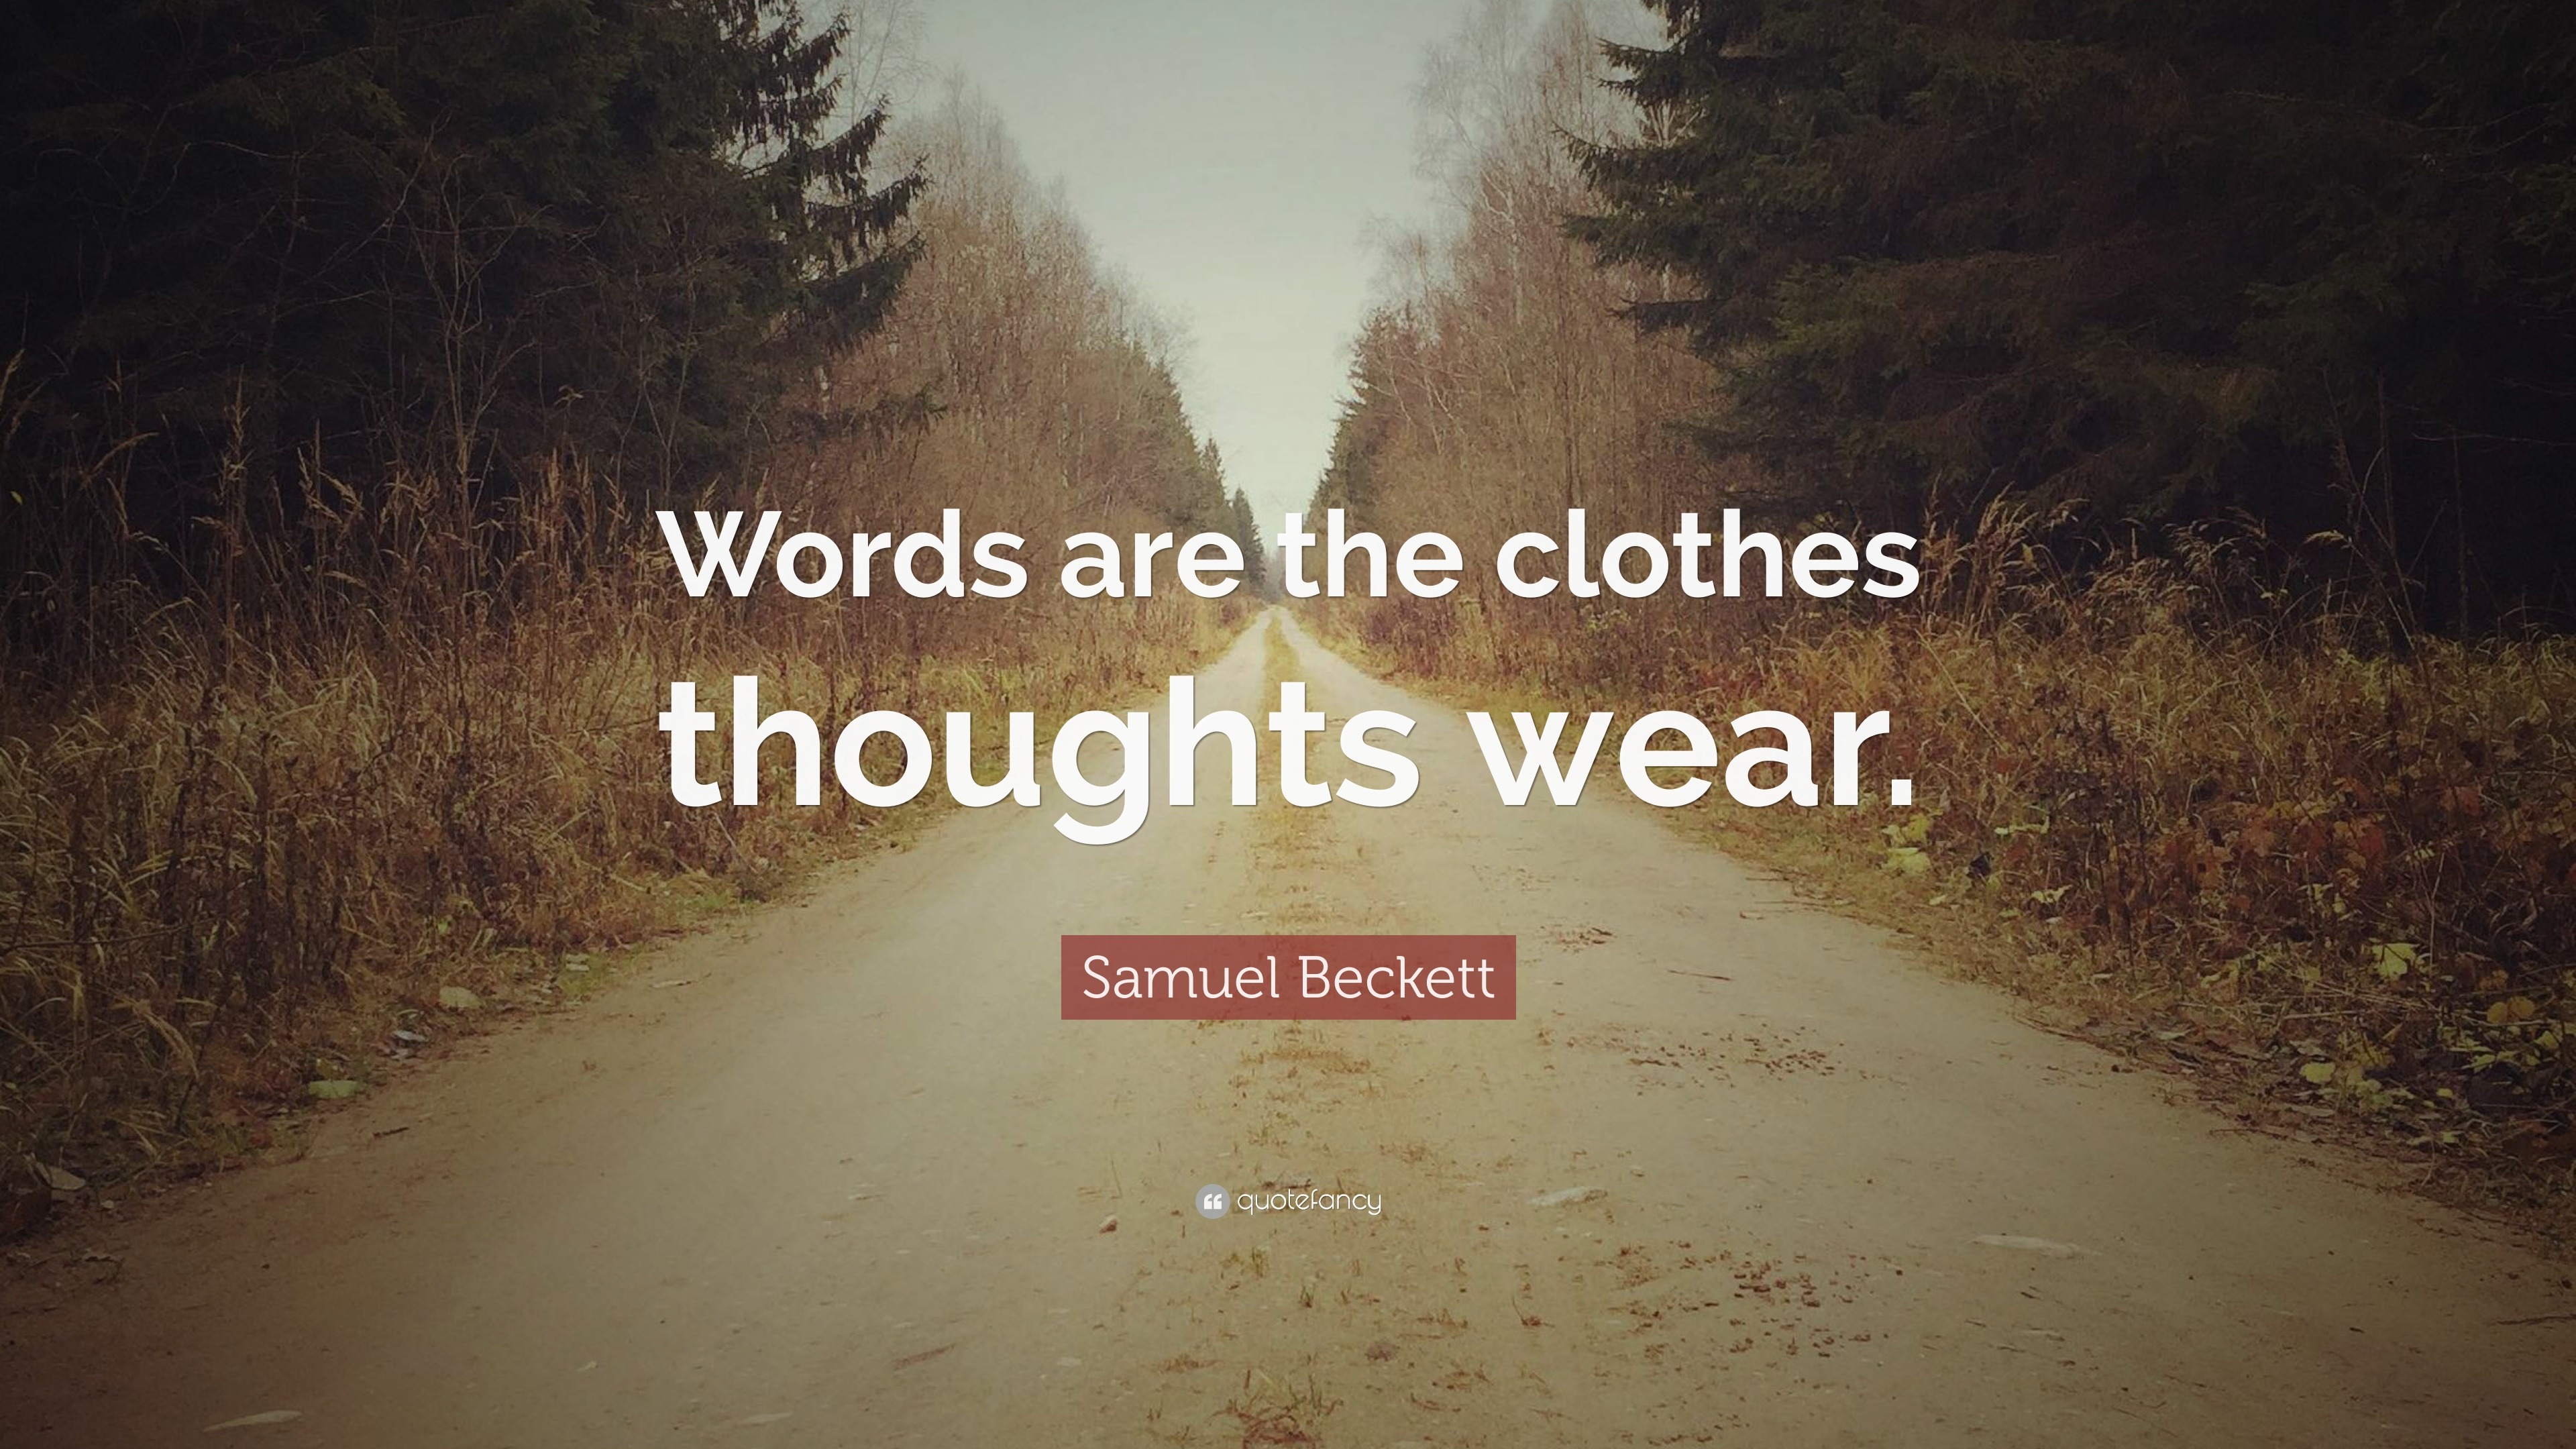 82378 Samuel Beckett Quote Words are the clothes thoughts wear